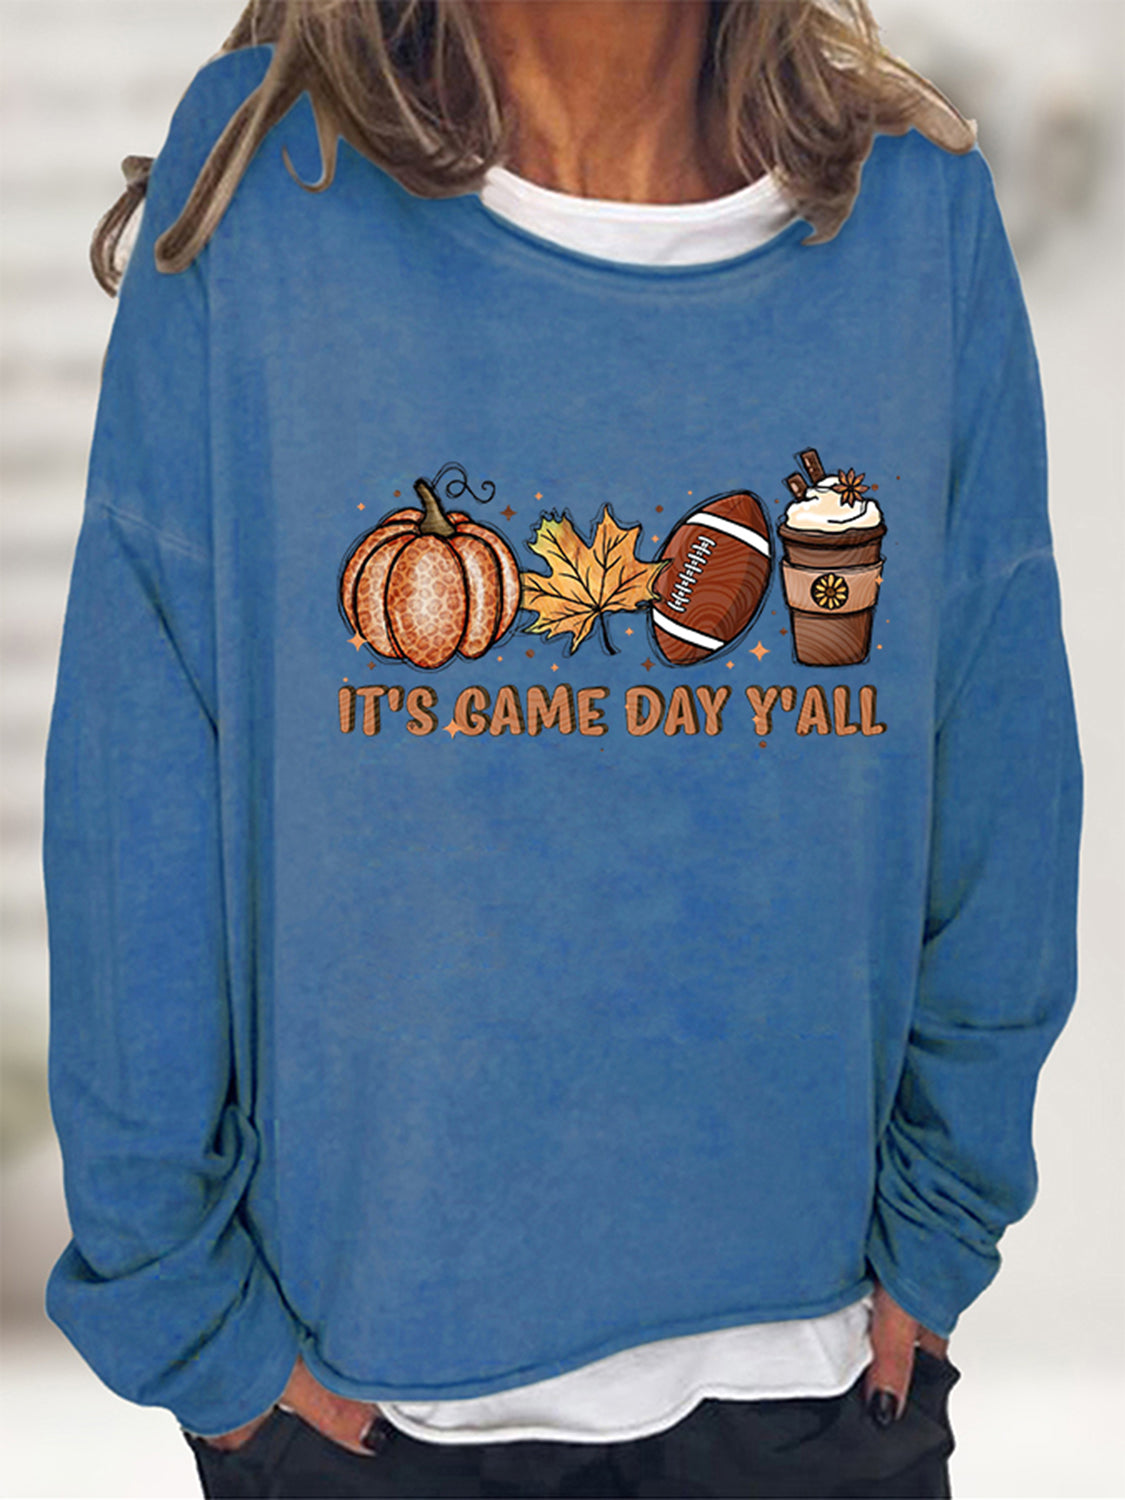 IT’S GAME DAY Y’ALL Graphic Sweatshirt - Blue / S - T-Shirts - Shirts & Tops - 7 - 2024